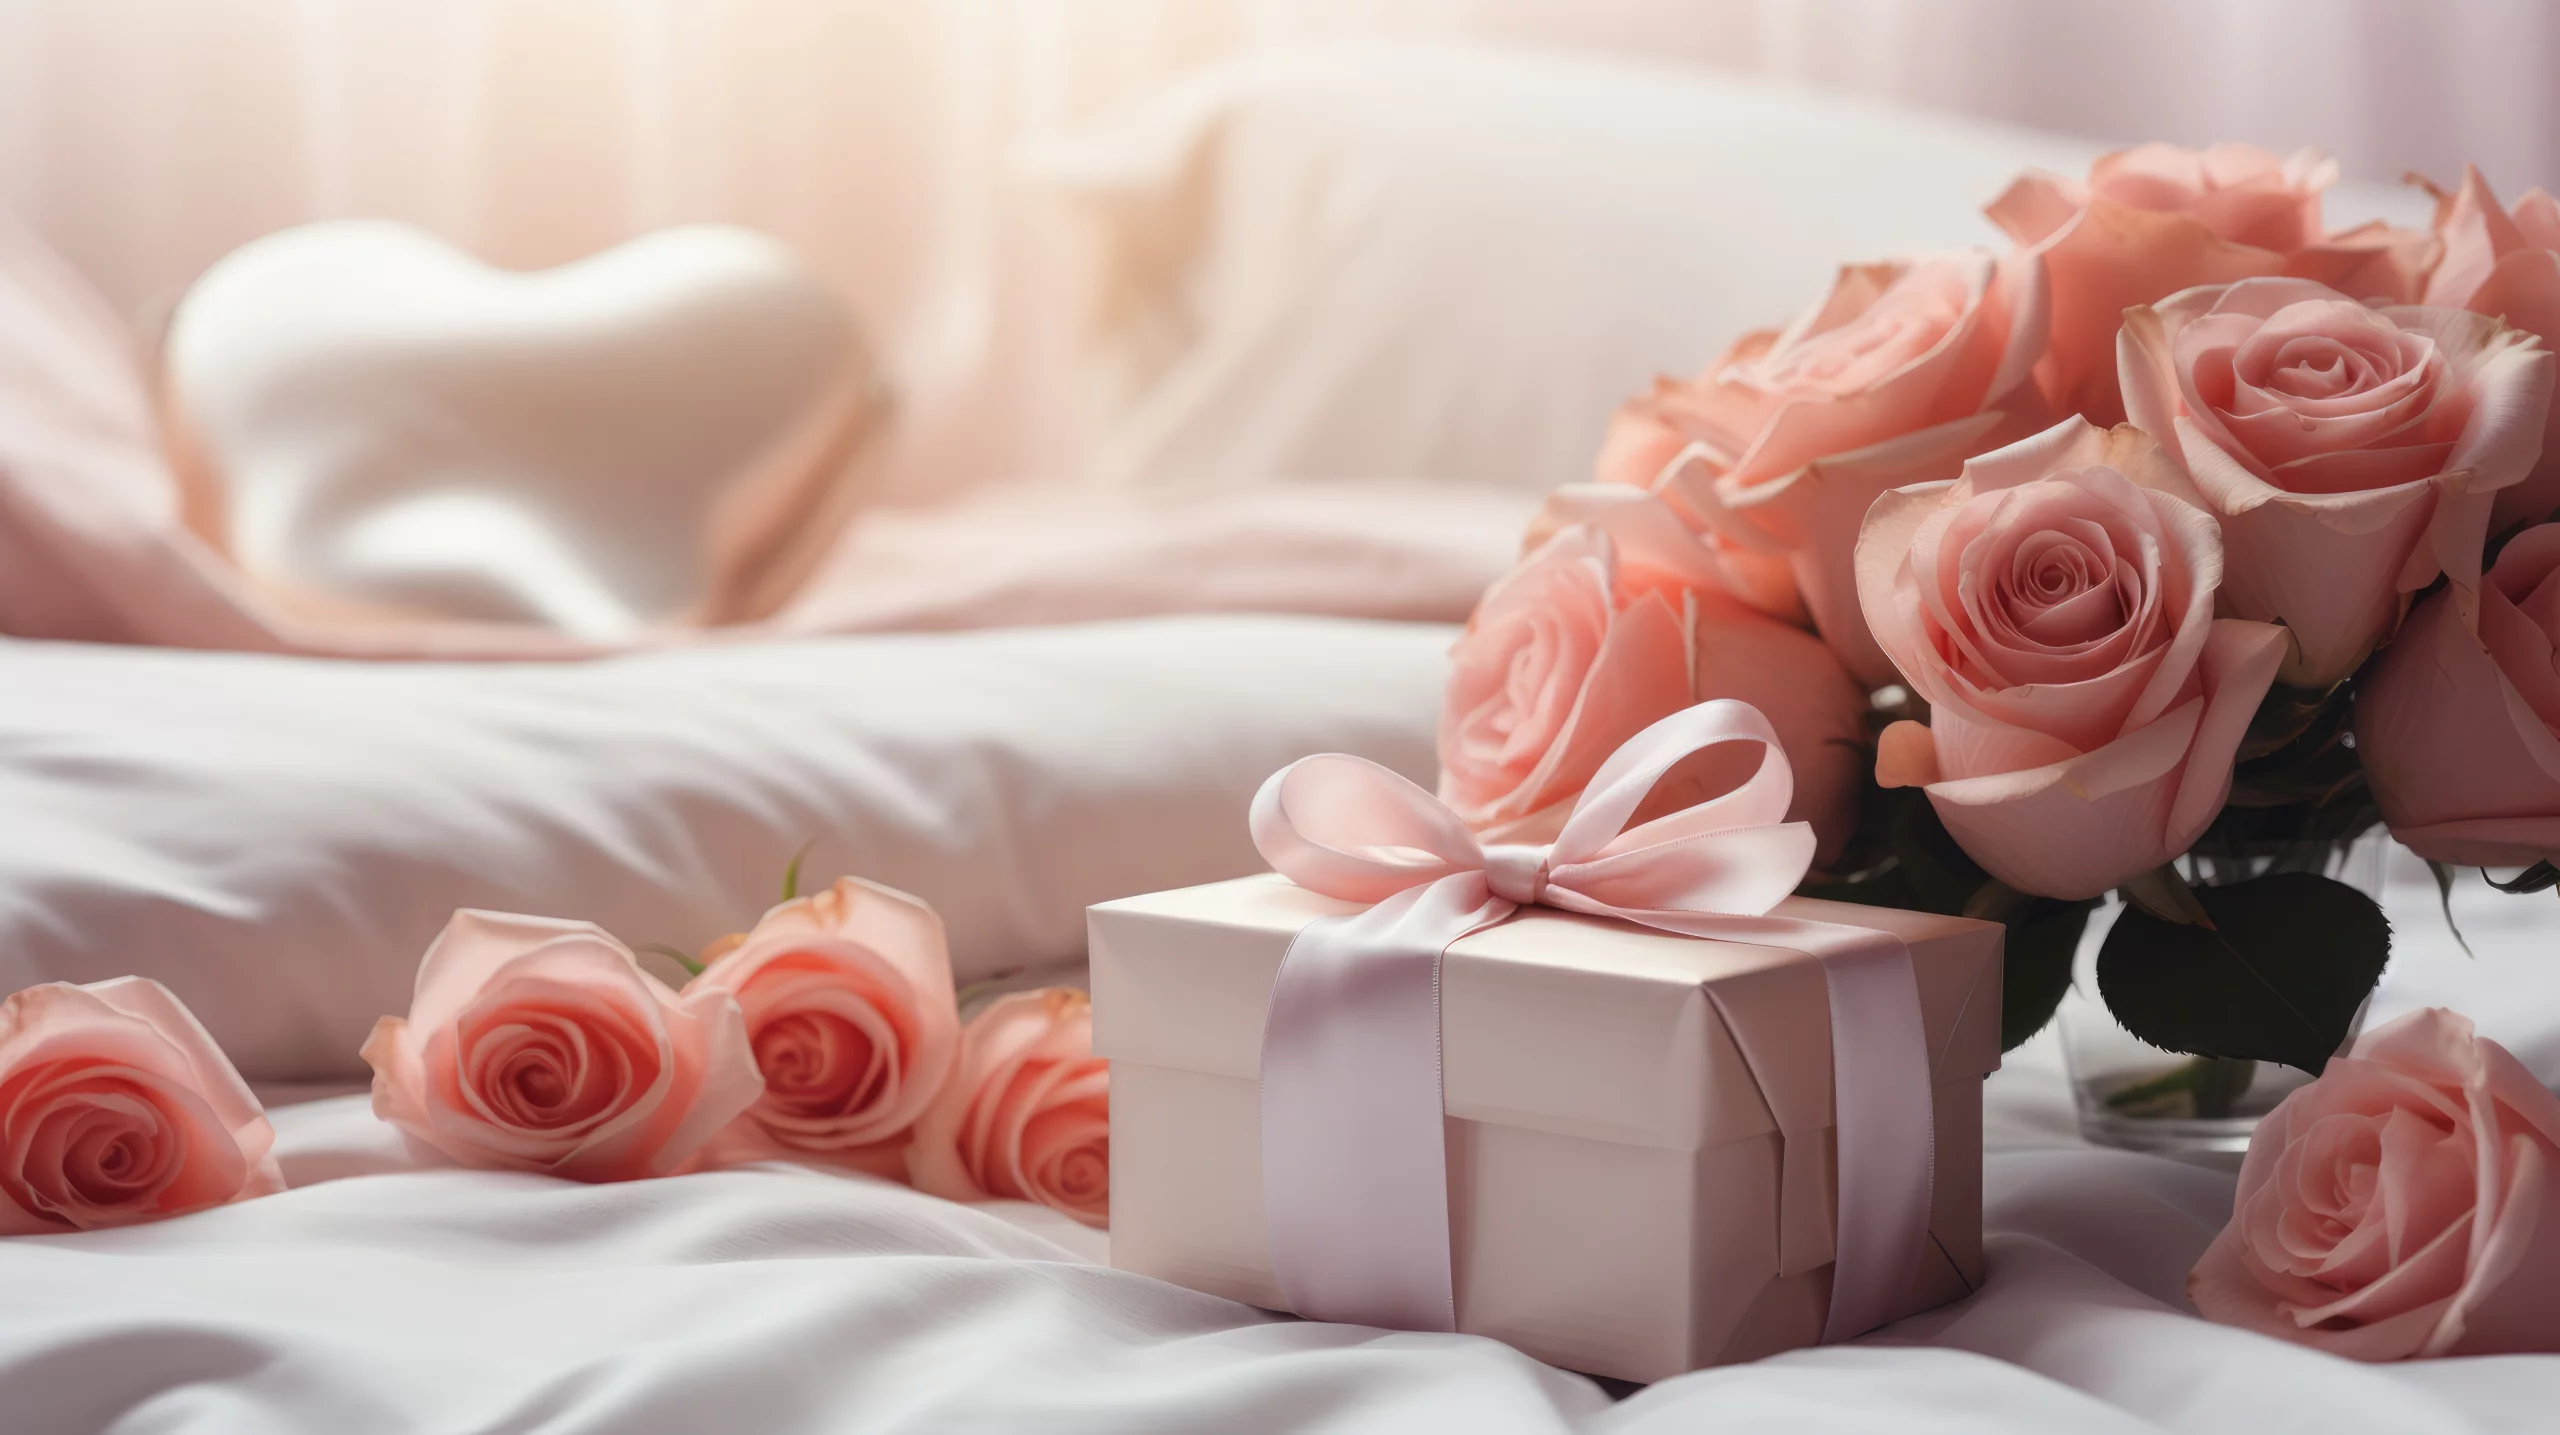 Valentines day flowers singapore https://beato.com.sg/shop/occasions/valentine-day/